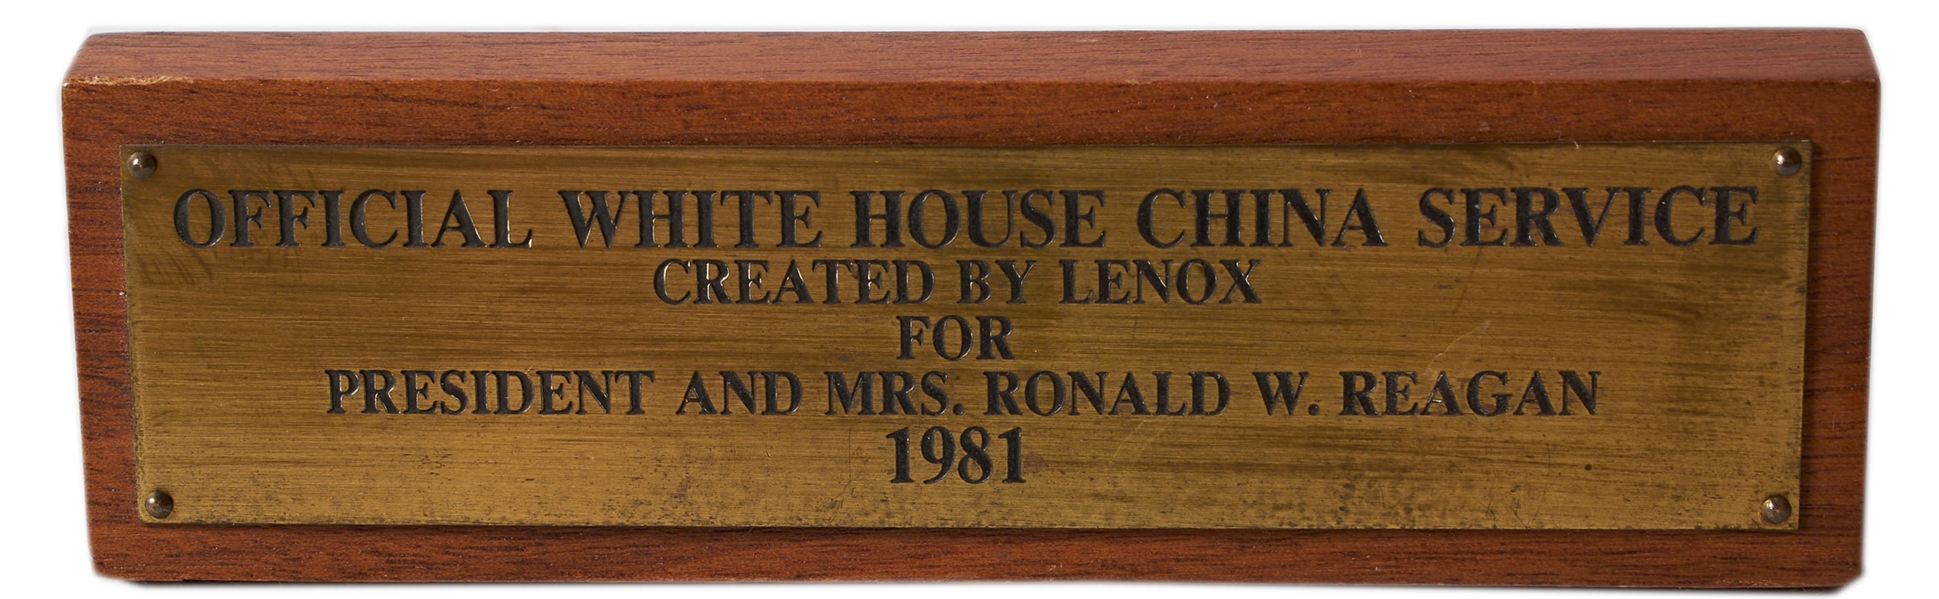 Reagan White House China by Lenox -- Large Charger Plate in Red-Gold Design, Made for State Dinners